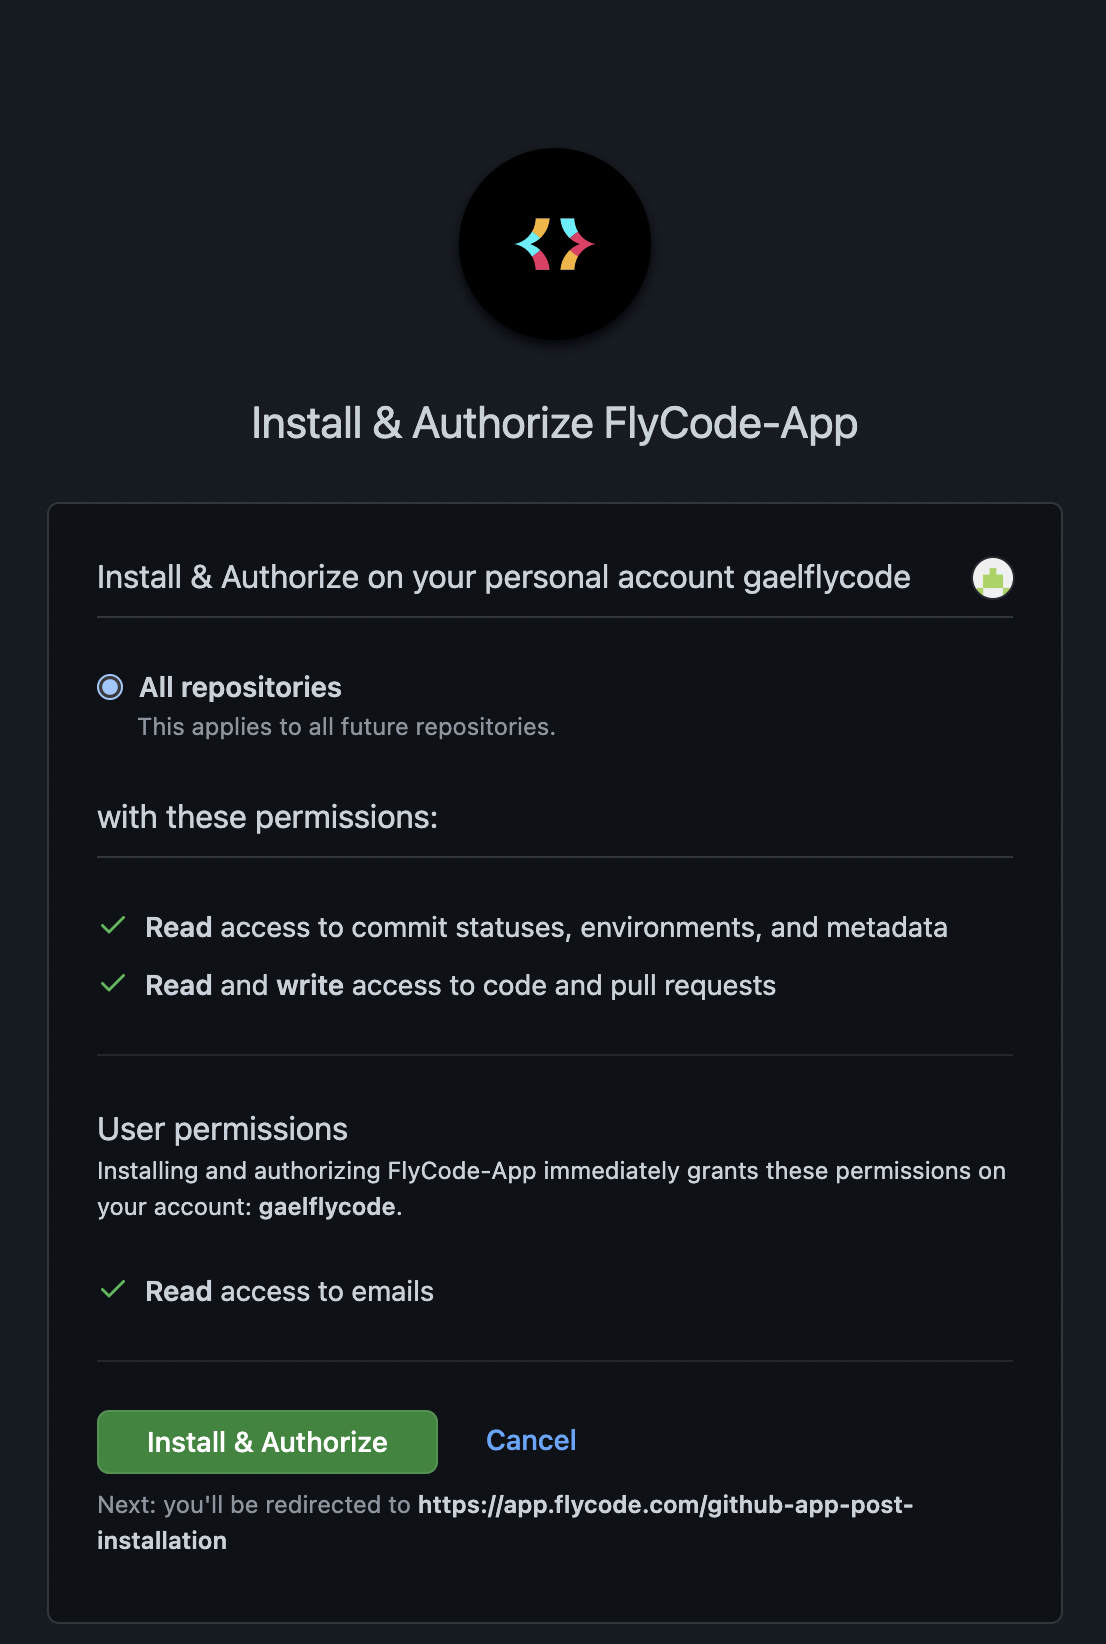 Authorize the FlyCode app and import your GitHub repositories